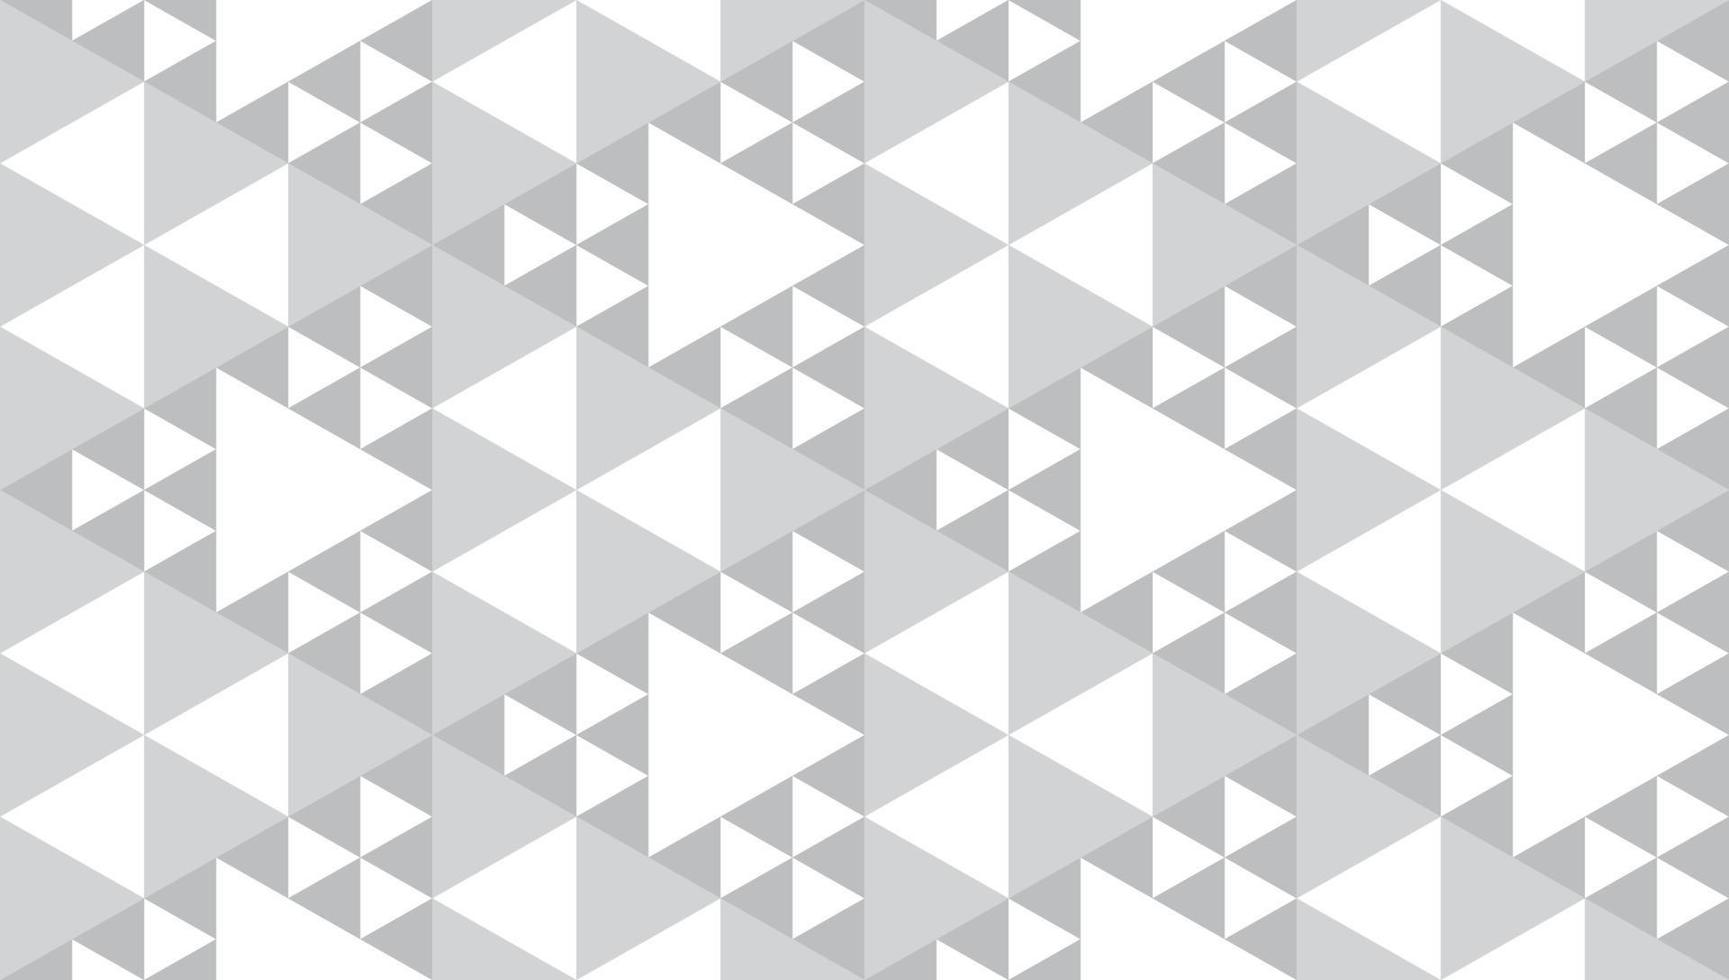 Abstract Monochrome Polygonal Triangles Ornament. Triangular Shapes Wallpaper. Geometric Seamless Pattern Design Template. White Gray Color Theme. vector